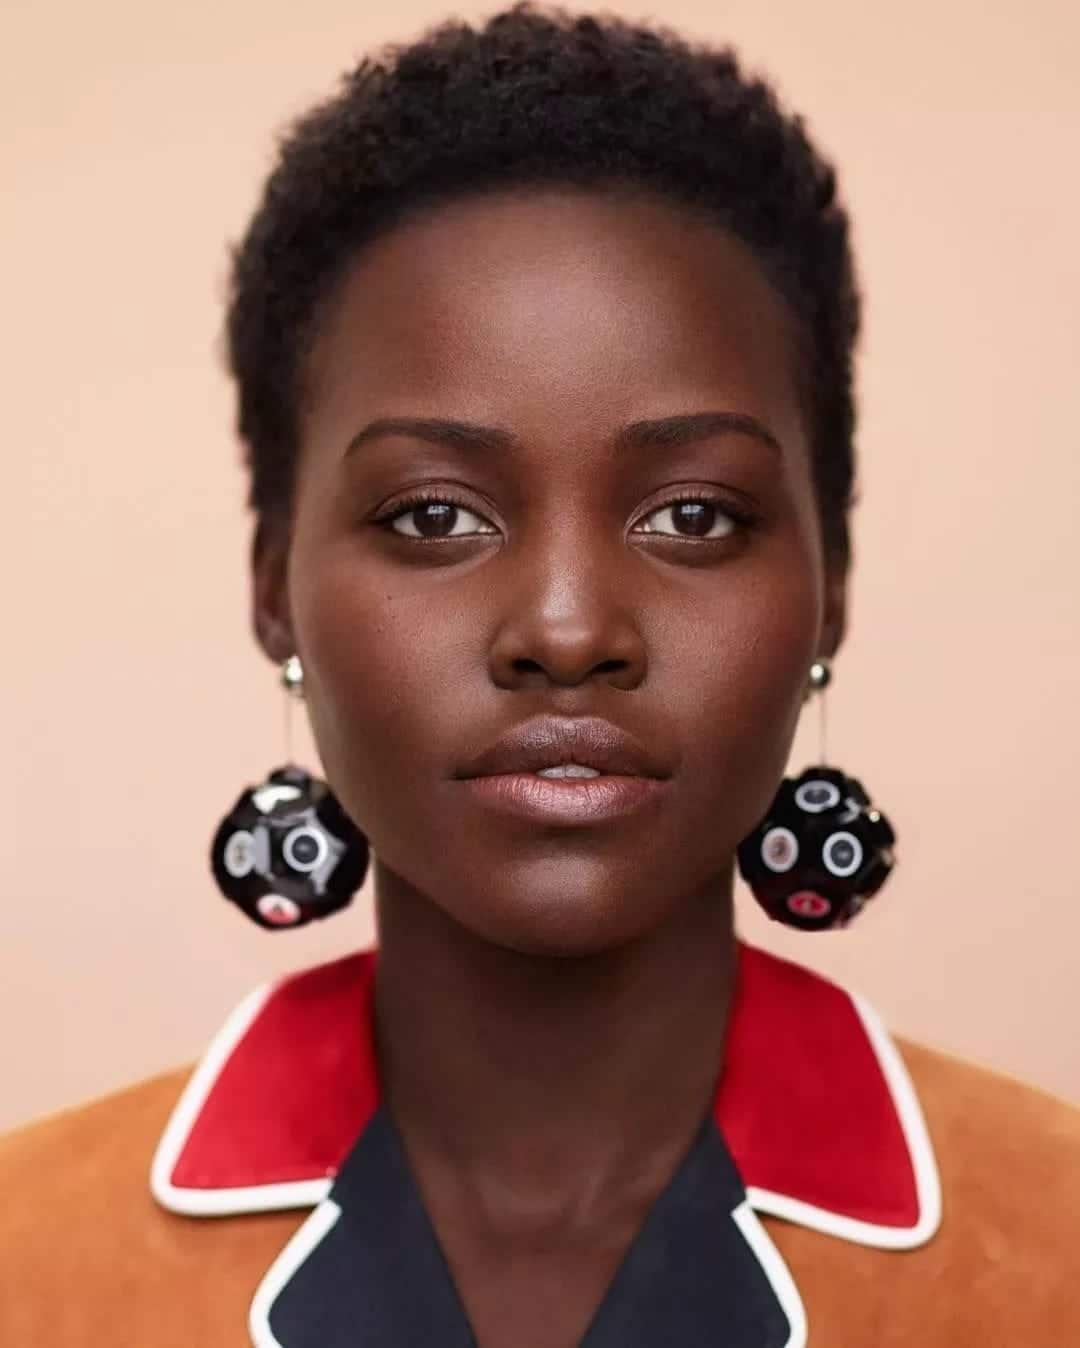 Actress Lupita Nyong'o forced to apologise after basing her voice on disability